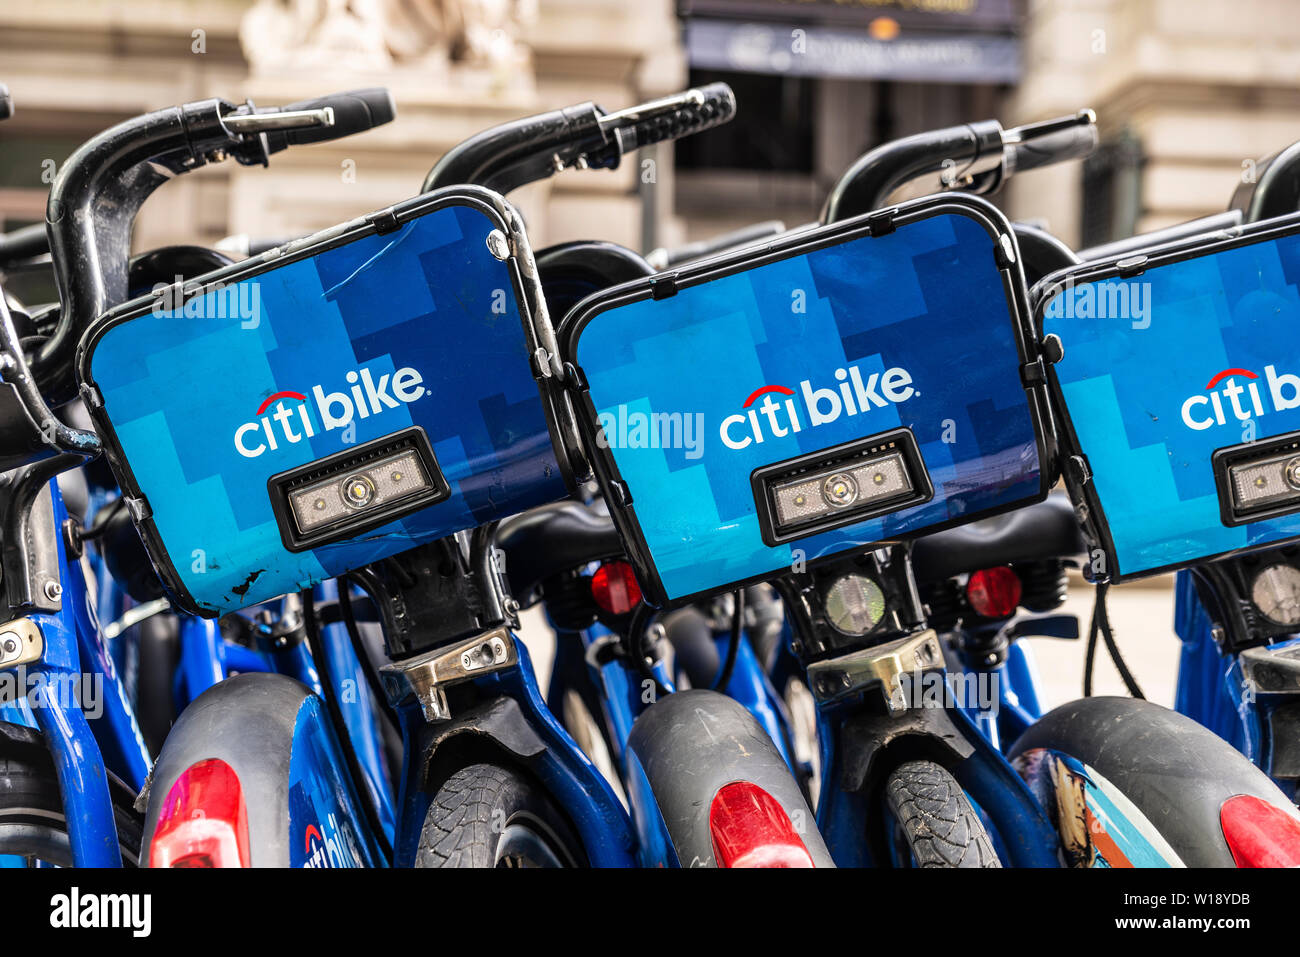 New York City, USA - August 1, 2018: A row of rental bikes with advertising from Citibank in their docking stands on a street in New York City, USA Stock Photo